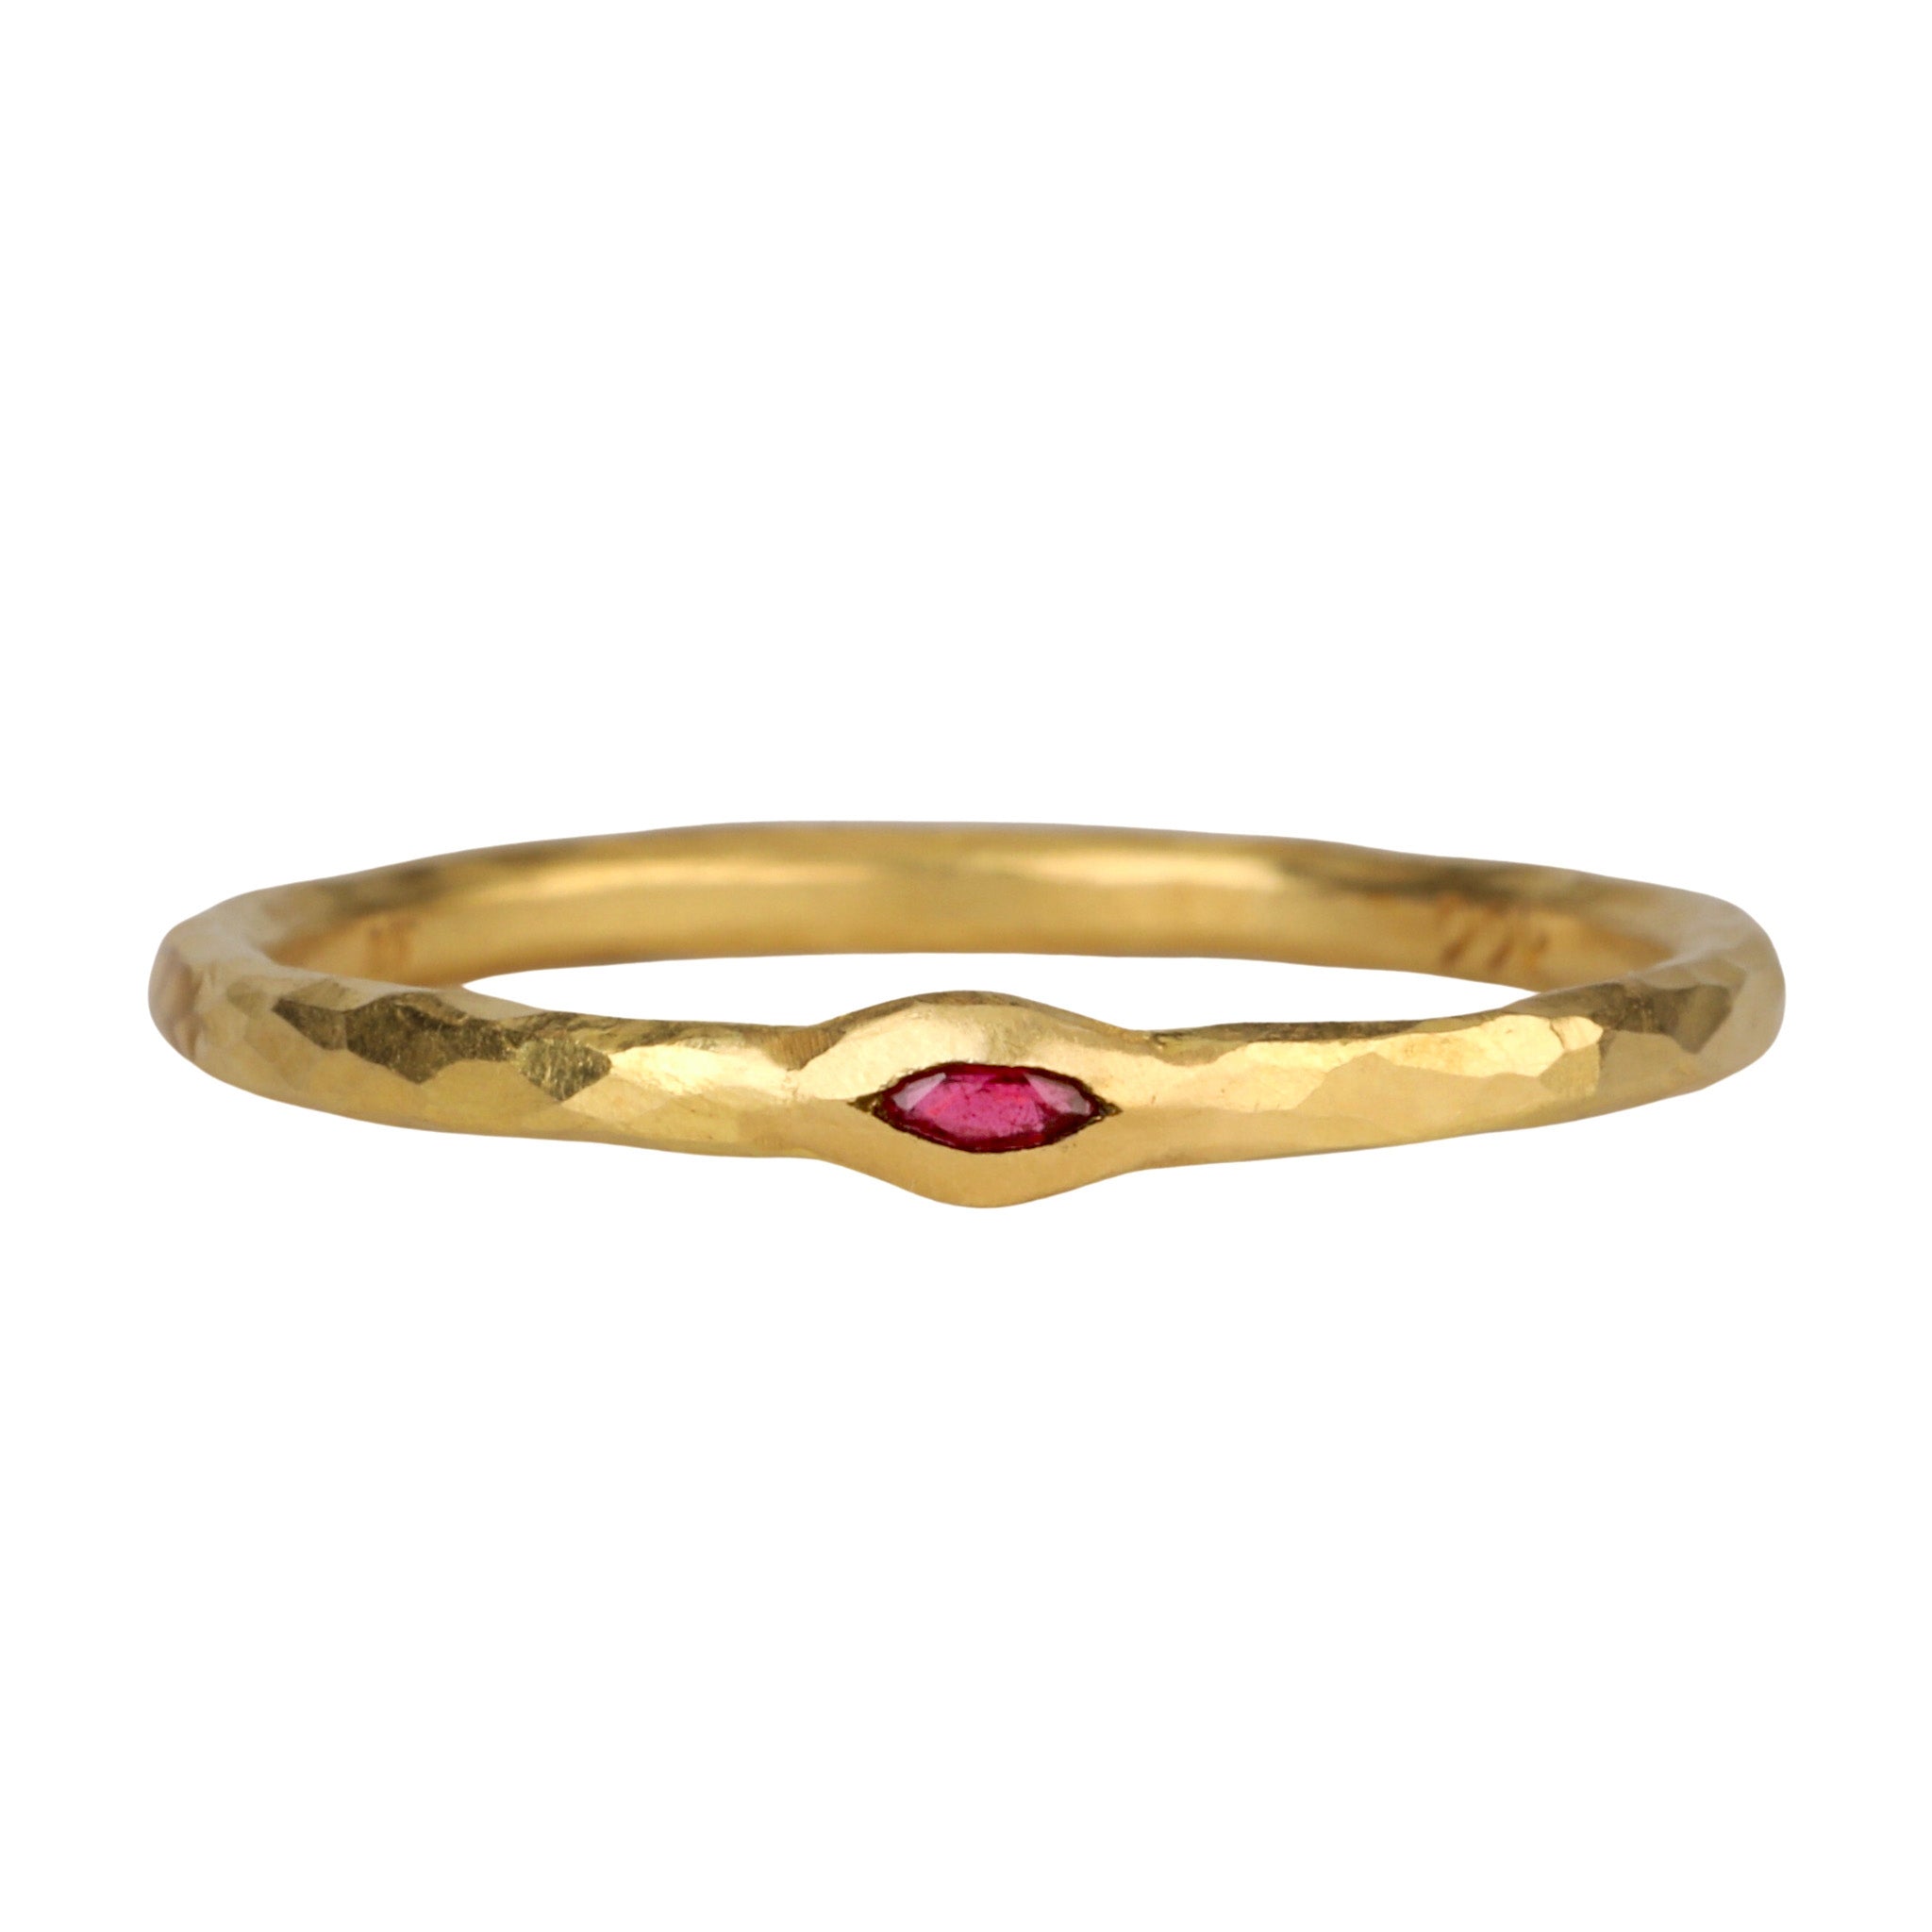 22K Gold Thin Hammered Band with Marquise Ruby - Peridot Fine Jewelry - Cathy Waterman